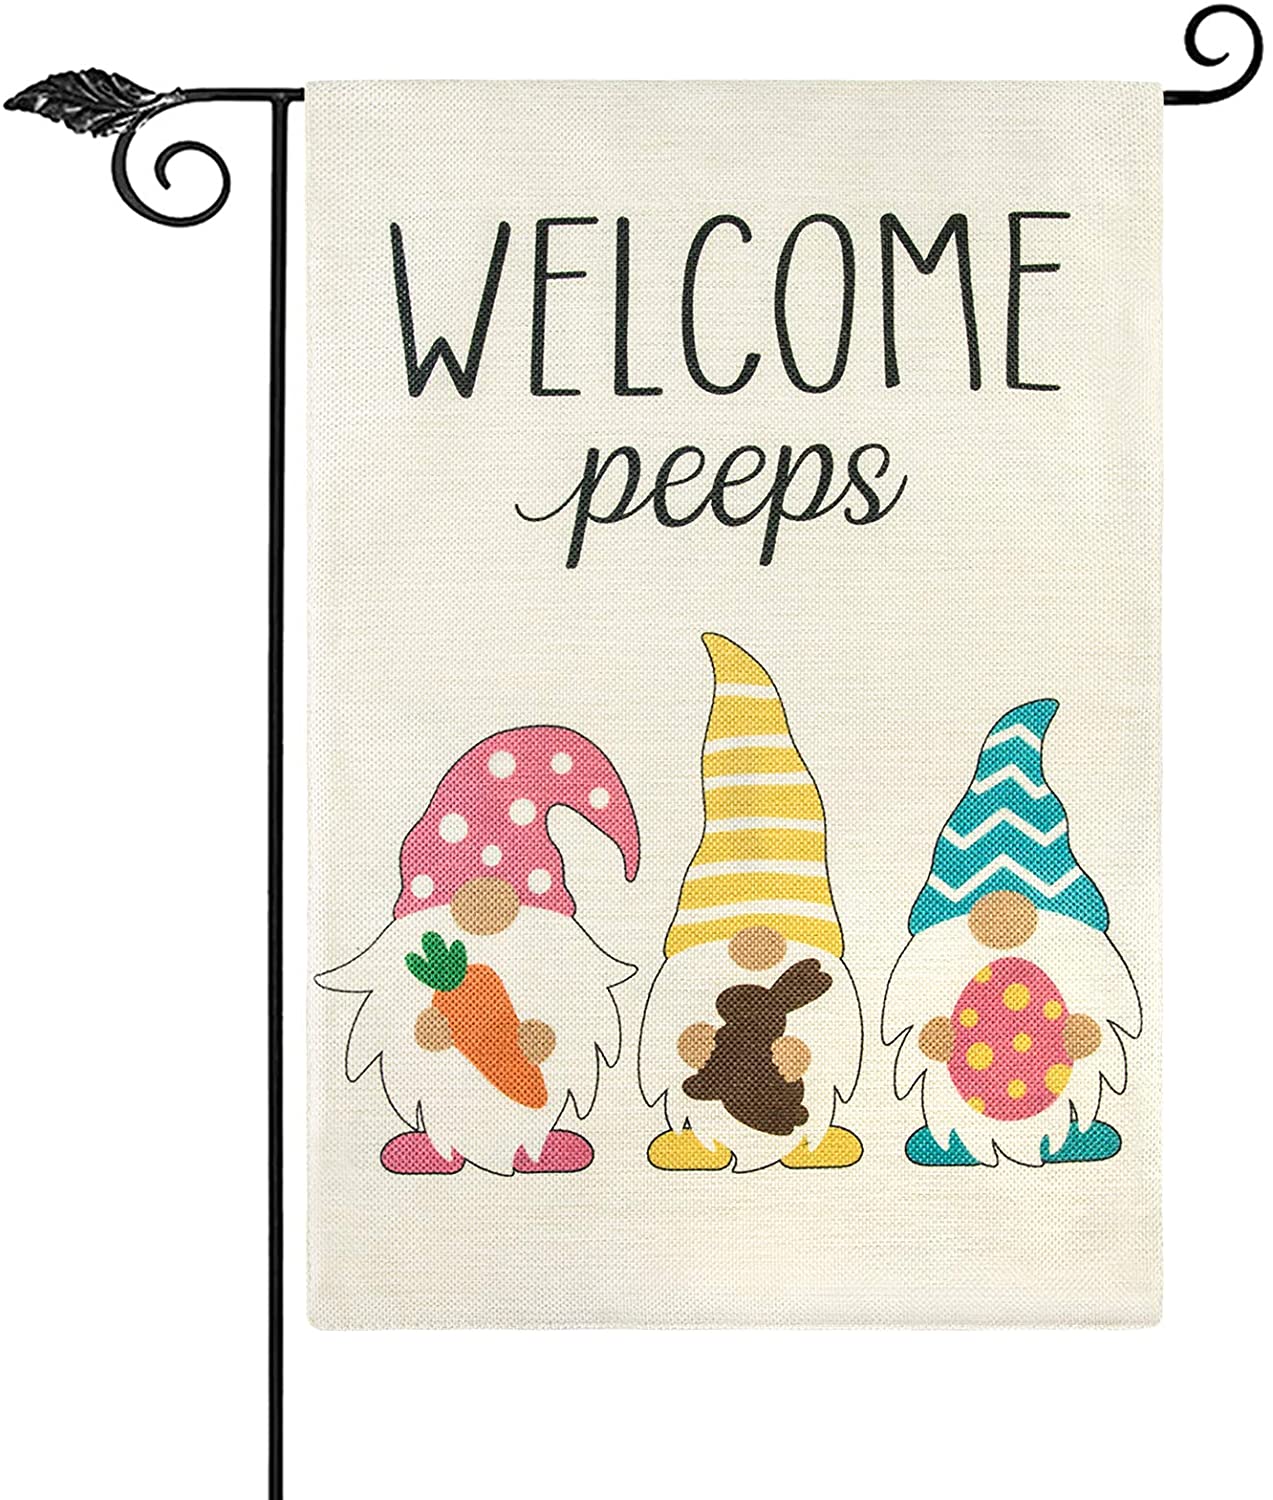 Reads correctly both sides Welcome Gnome Garden Flag; 12/" x 18/"; Double Sided